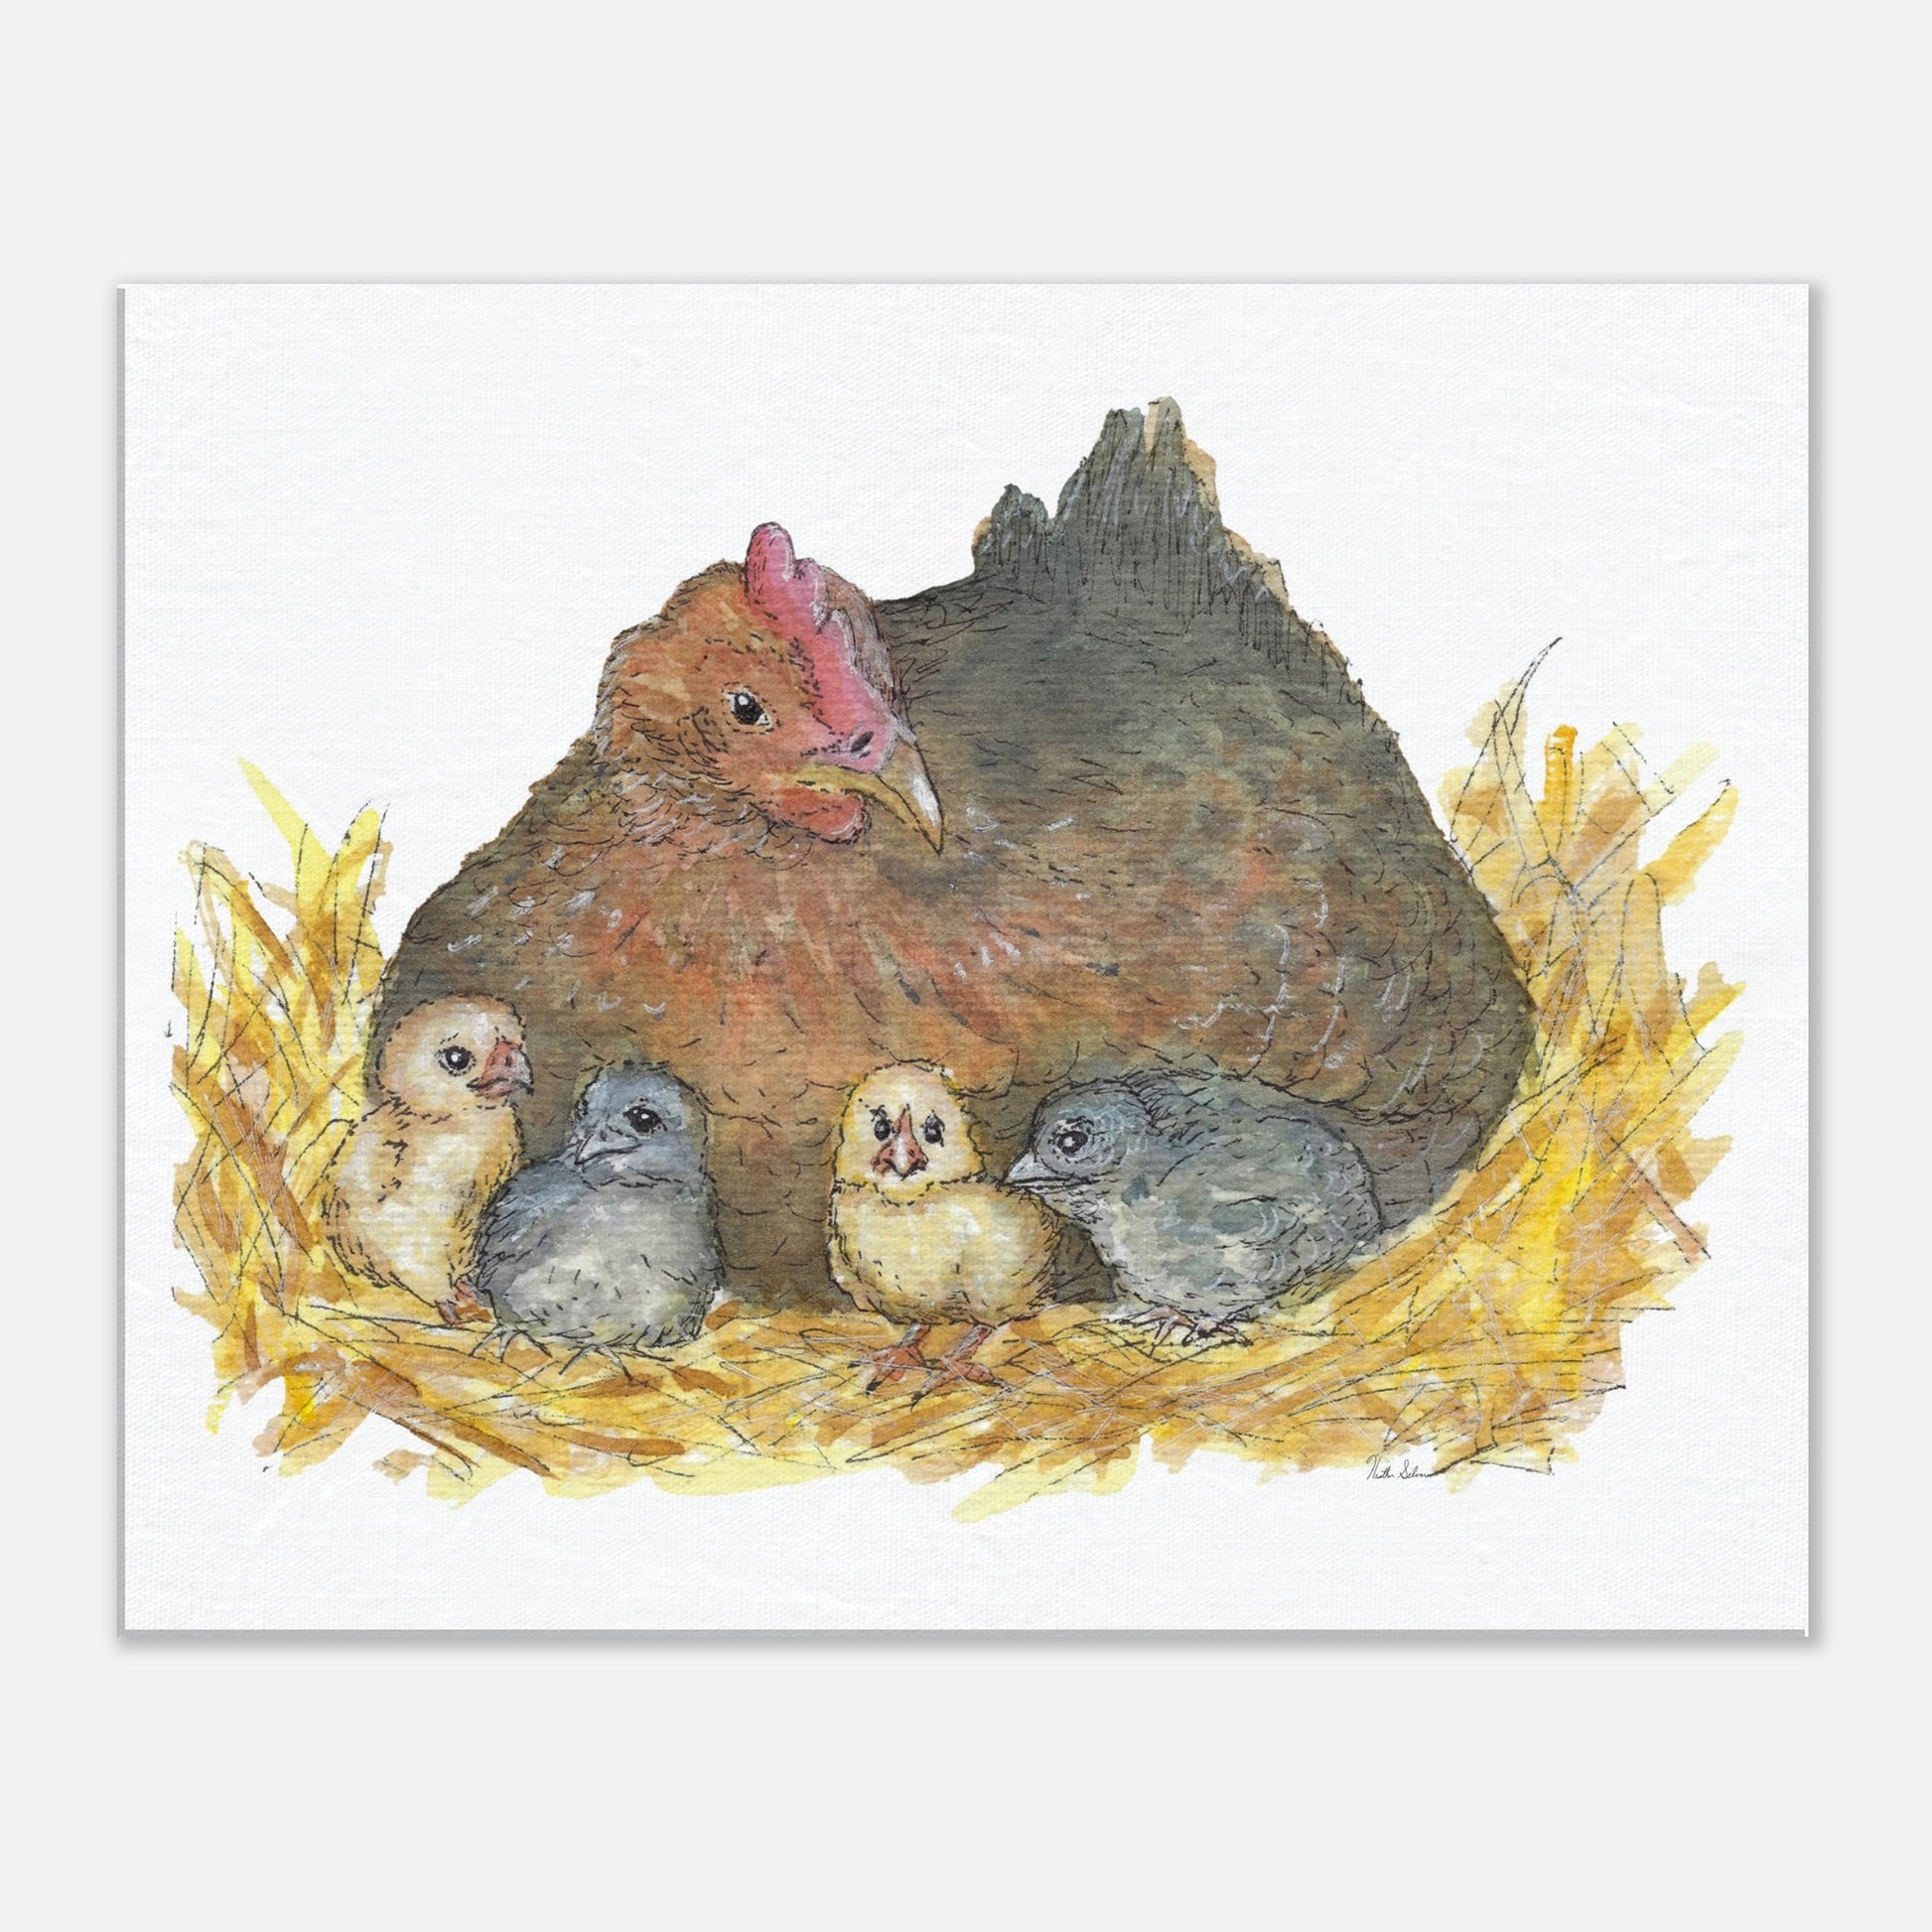 24 by 30 inch slim canvas Mother Hen print. Features a watercolor mother hen and her four chicks in a nest.